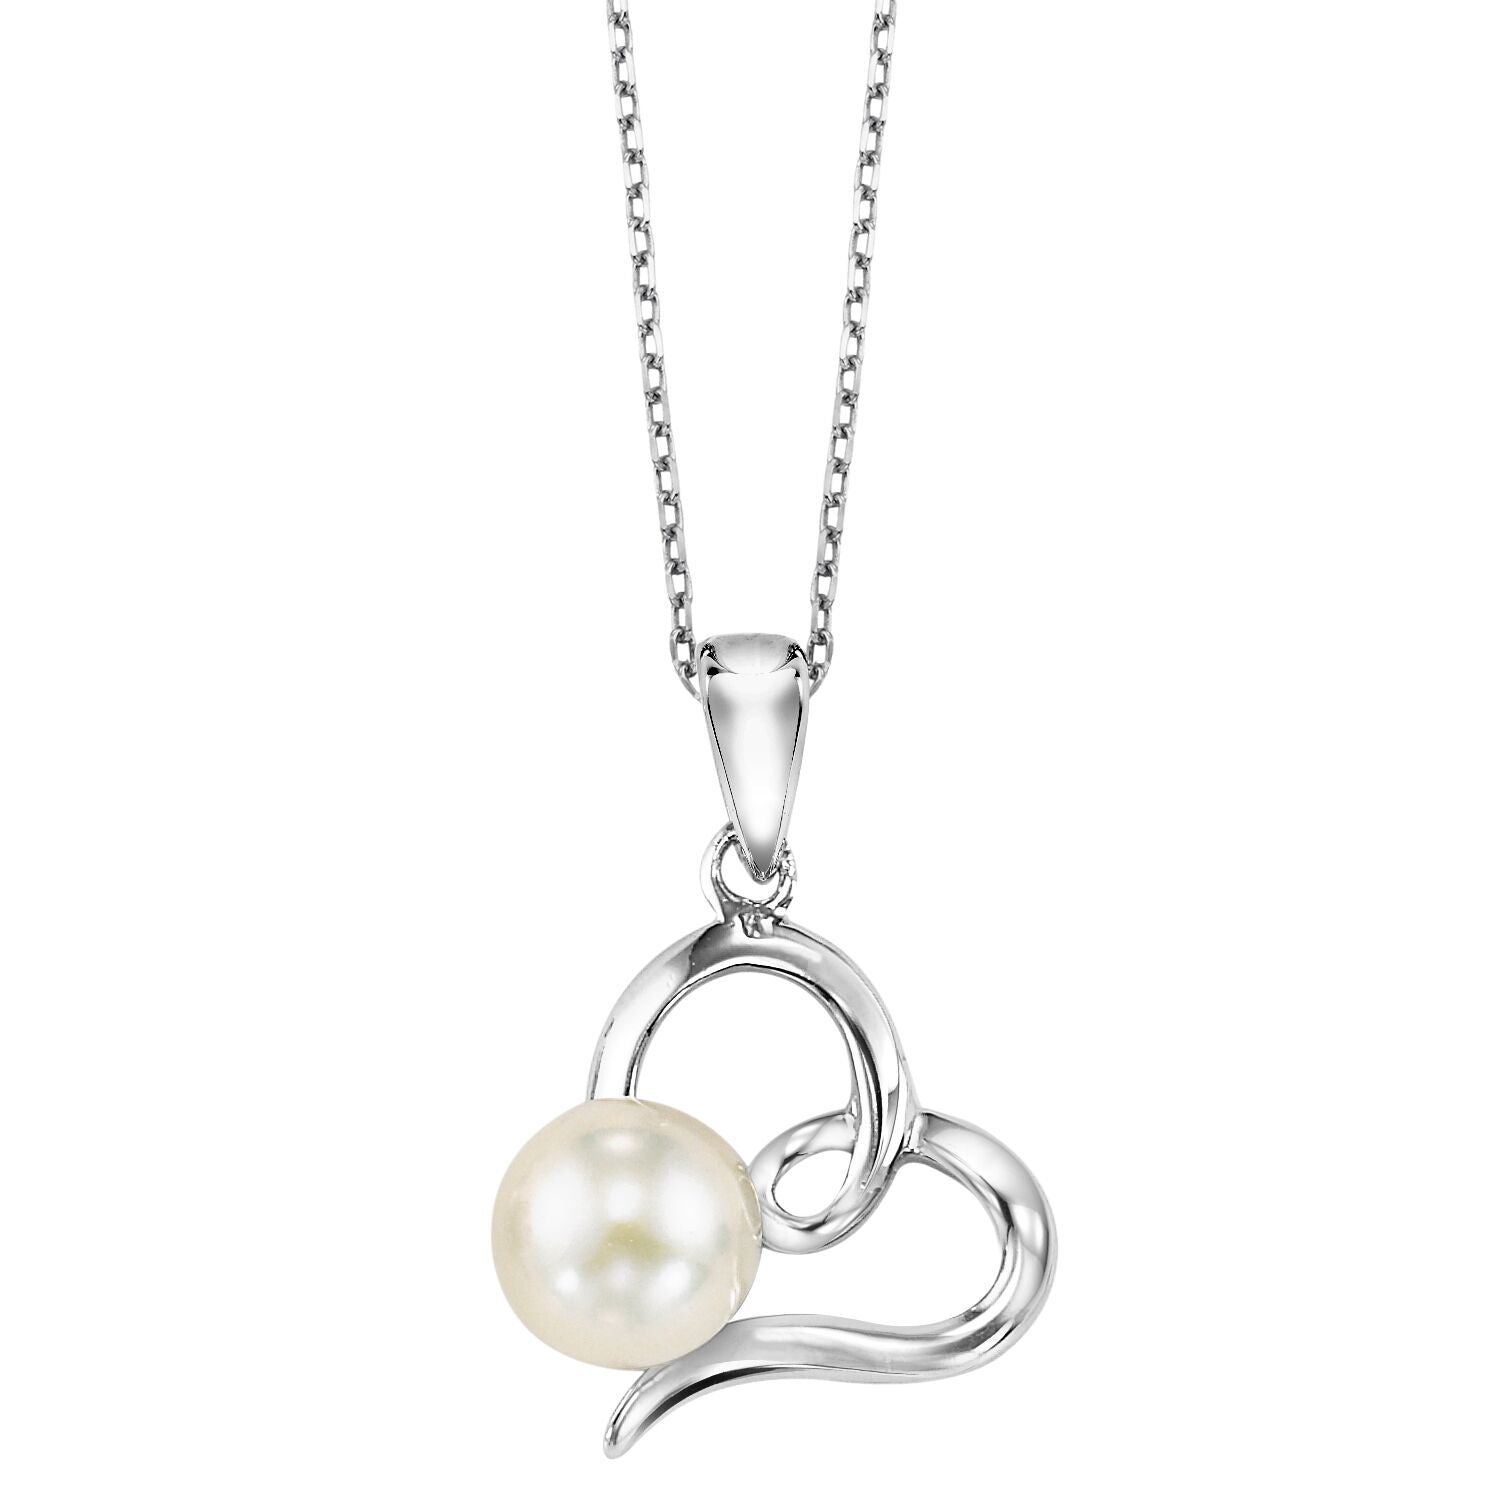 BW James Jewelers Necklace Silver and Pearl Pendant